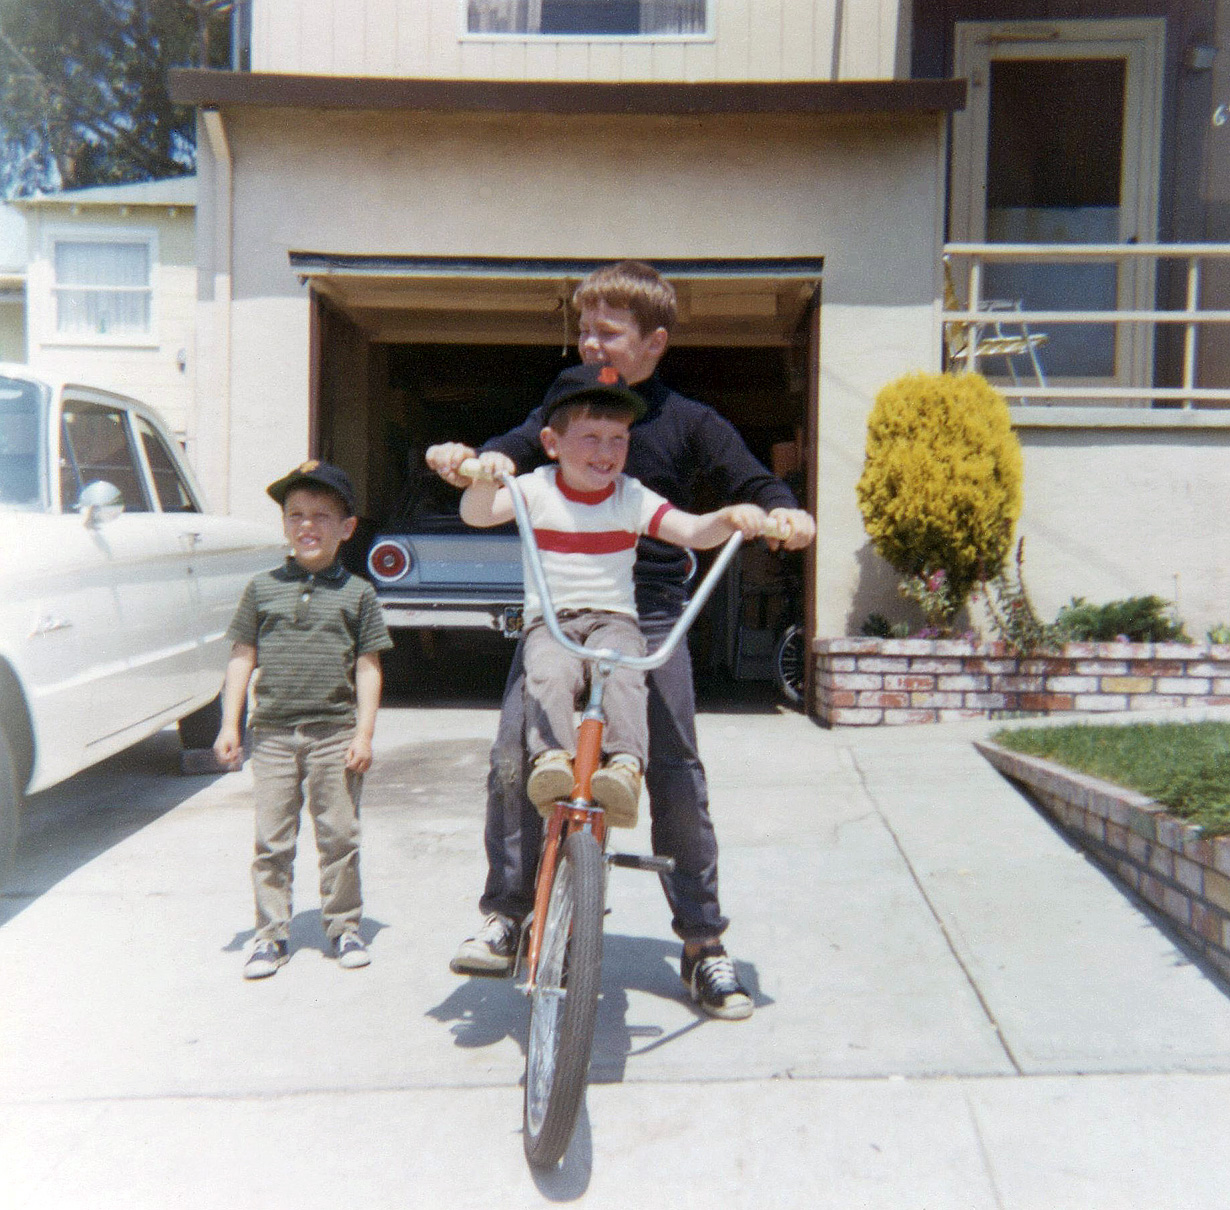 There I am in the white shirt and Giants cap riding with my friend Robert.  He taught me to ride a bike after getting tired of hauling me around like this.  One day he got off the bike and gave me a push and I was solo for the first time!  Next-door neighbor Ray stands by as we prepare to launch.  Dad's 1962 Ford Falcon at left was soon traded for a new '66 MG Midget and the Midget was soon traded for a new '67 Austin Healey 3000.  Mom's new '66 Ford Falcon resides in the garage.  This was our house on Claremont Avenue in East Richmond Heights in the San Francisco Bay Area. View full size.